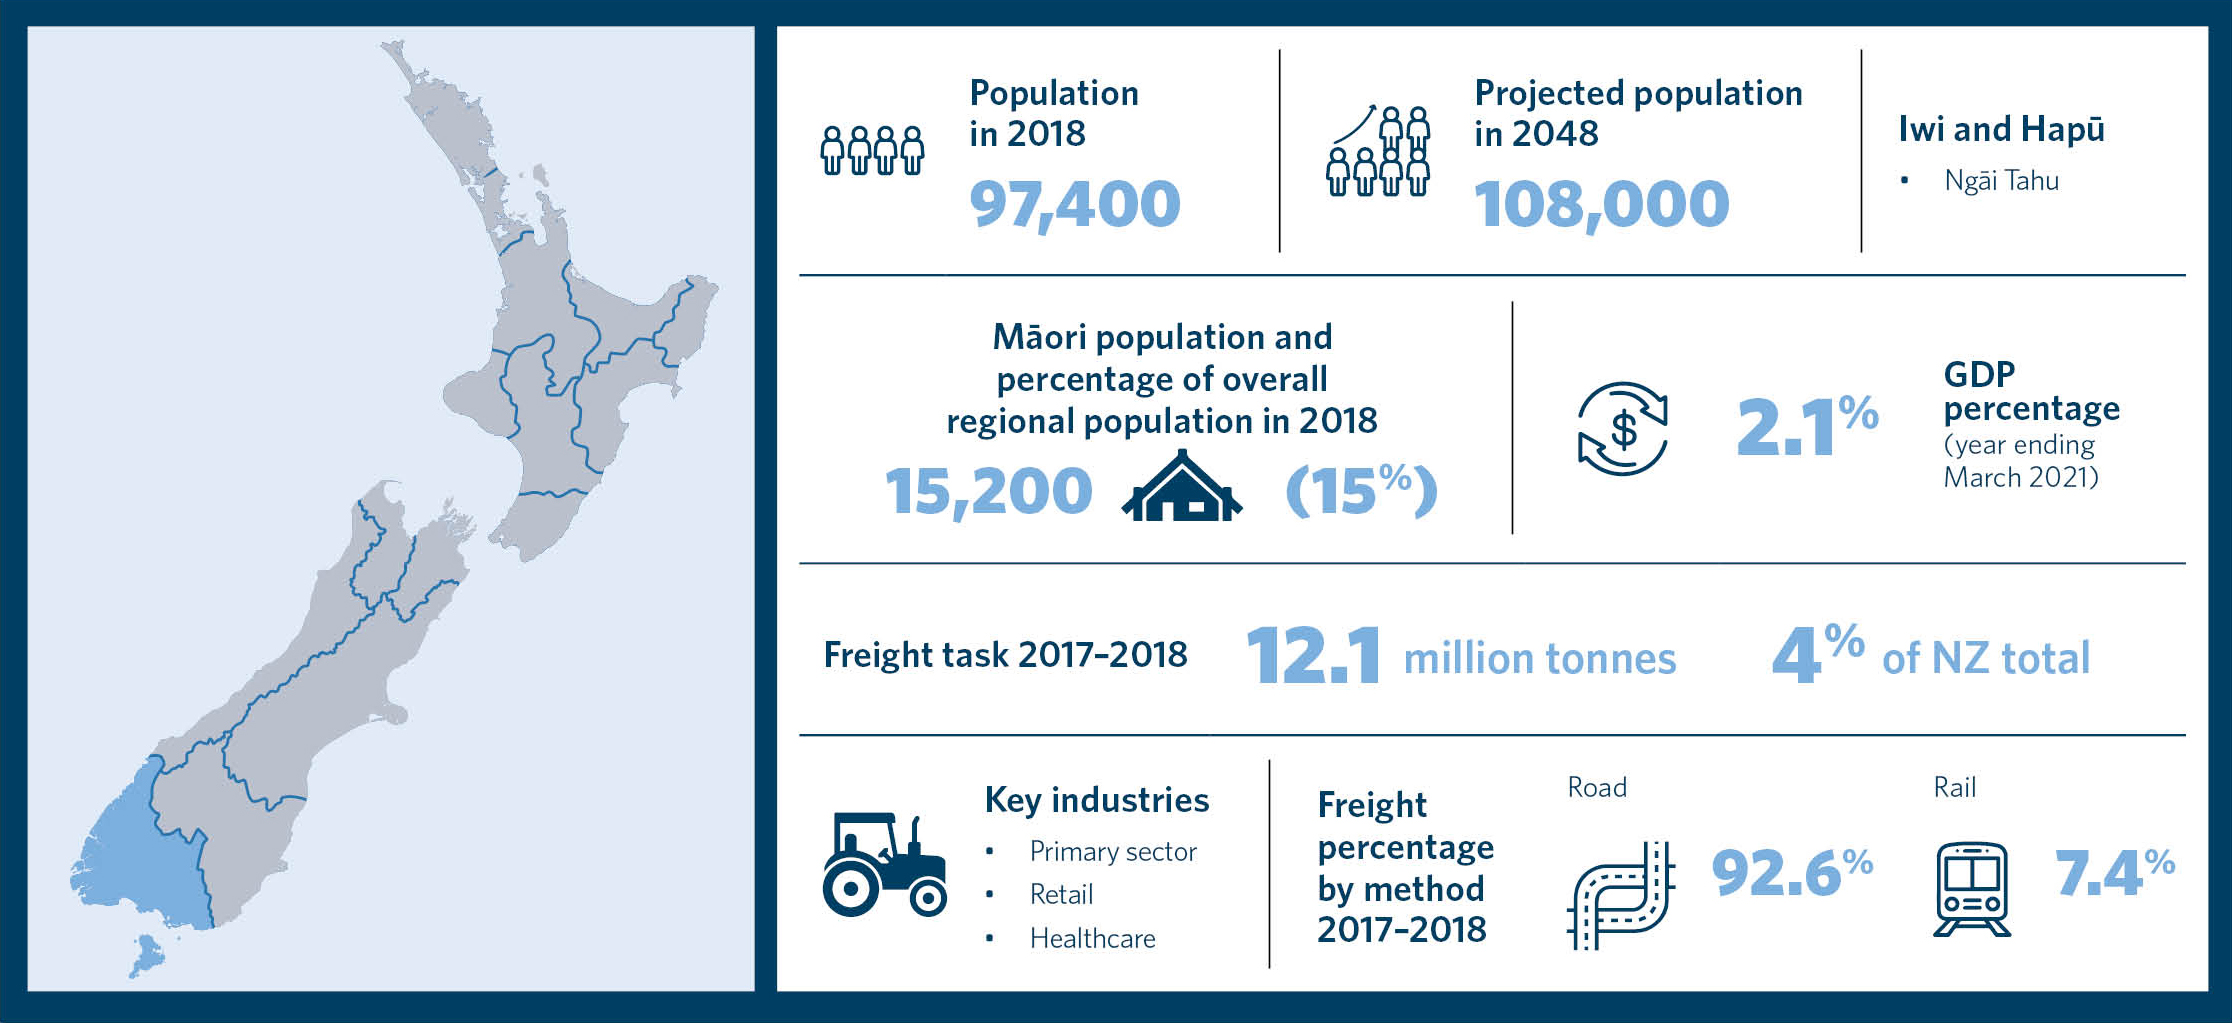 This is an infographic showing statistics for the region of Murihiku Southland. It includes information about the population in 2018, projected population in 2048, Māori population and percentage of overall regional population in 2018, a list of iwi and h